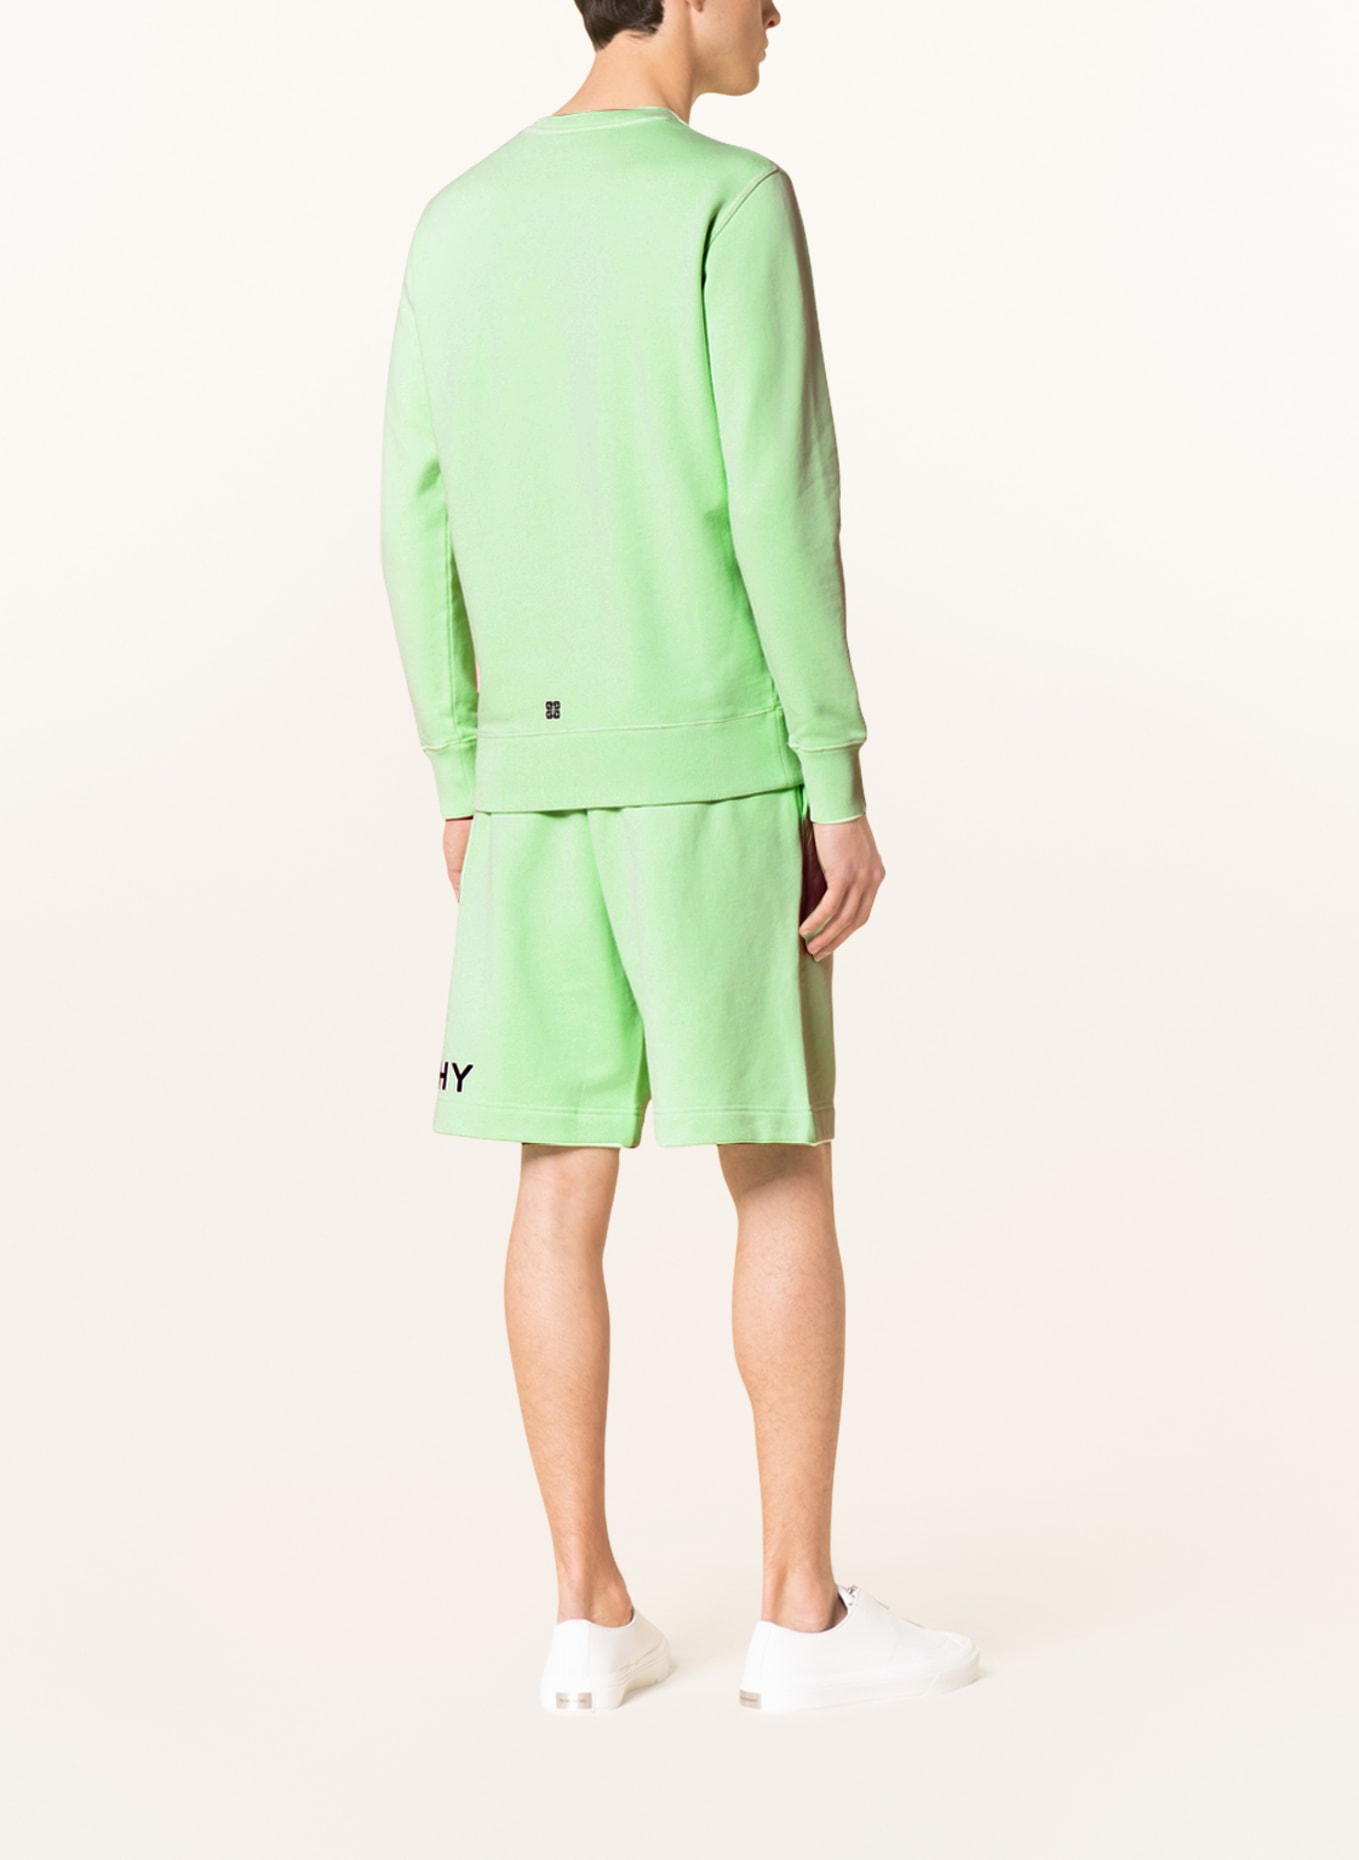 GIVENCHY Sweat shorts, Color: MINT (Image 3)